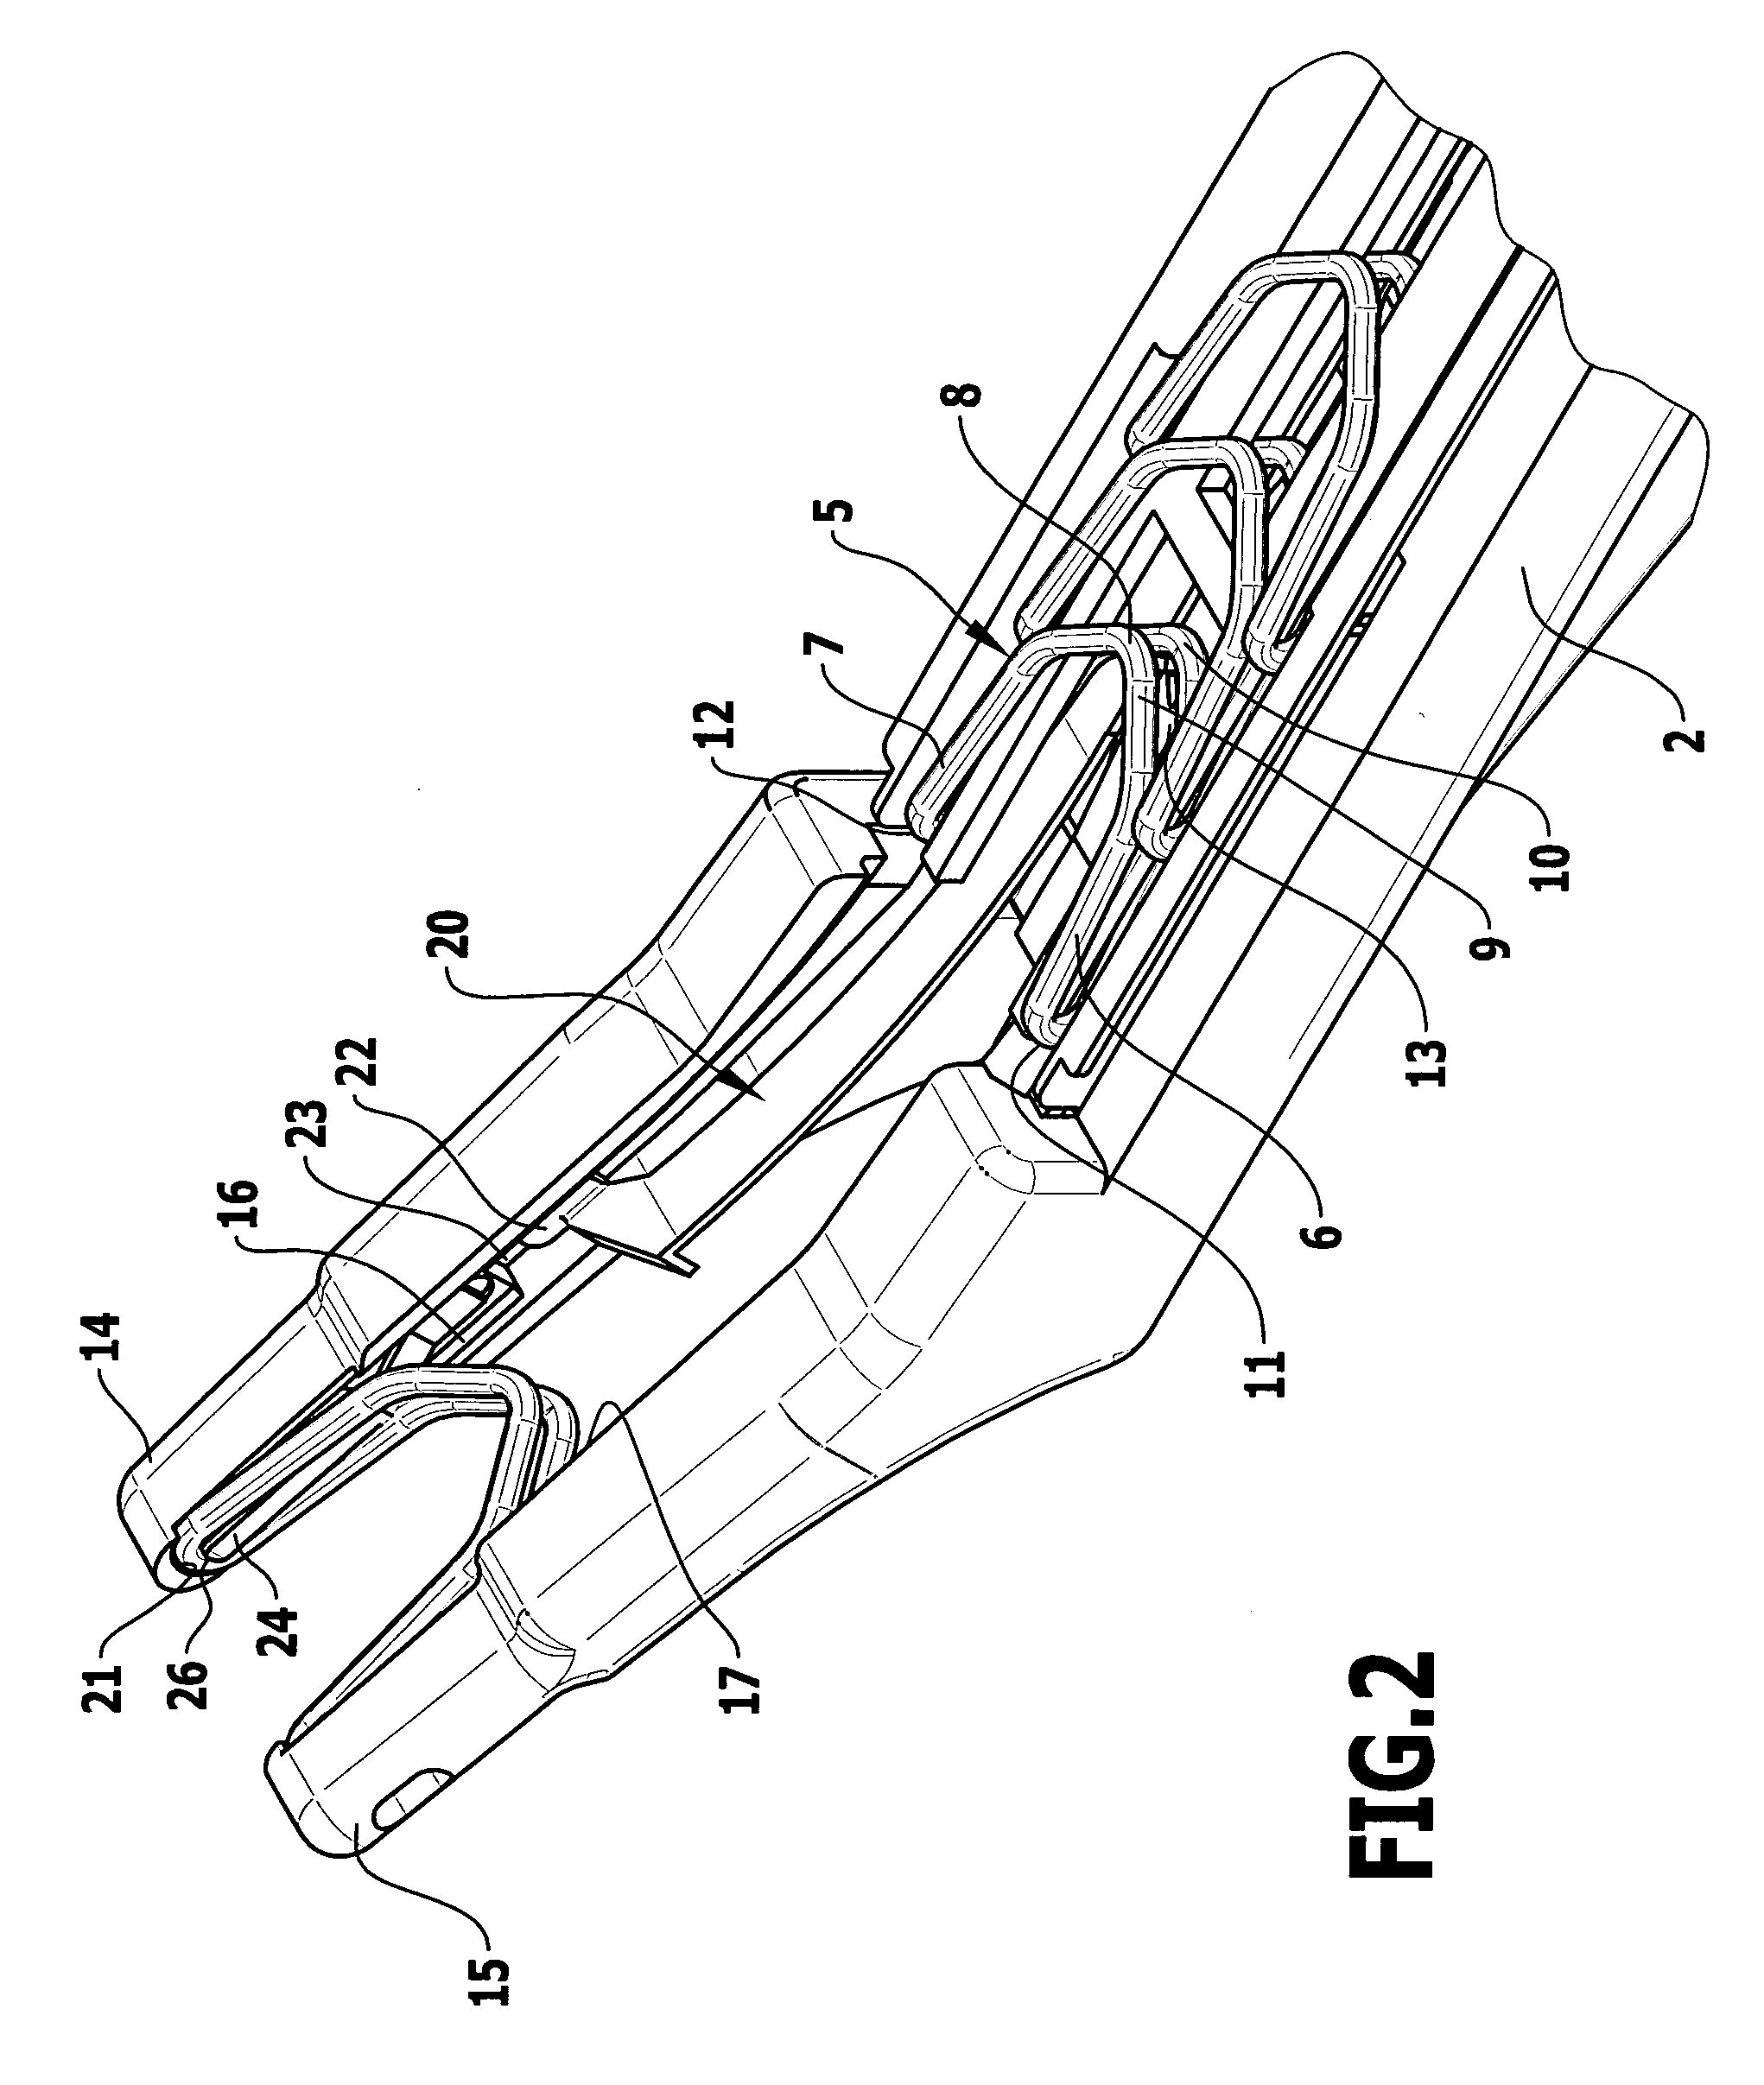 Surgical instrument for applying ligating clips